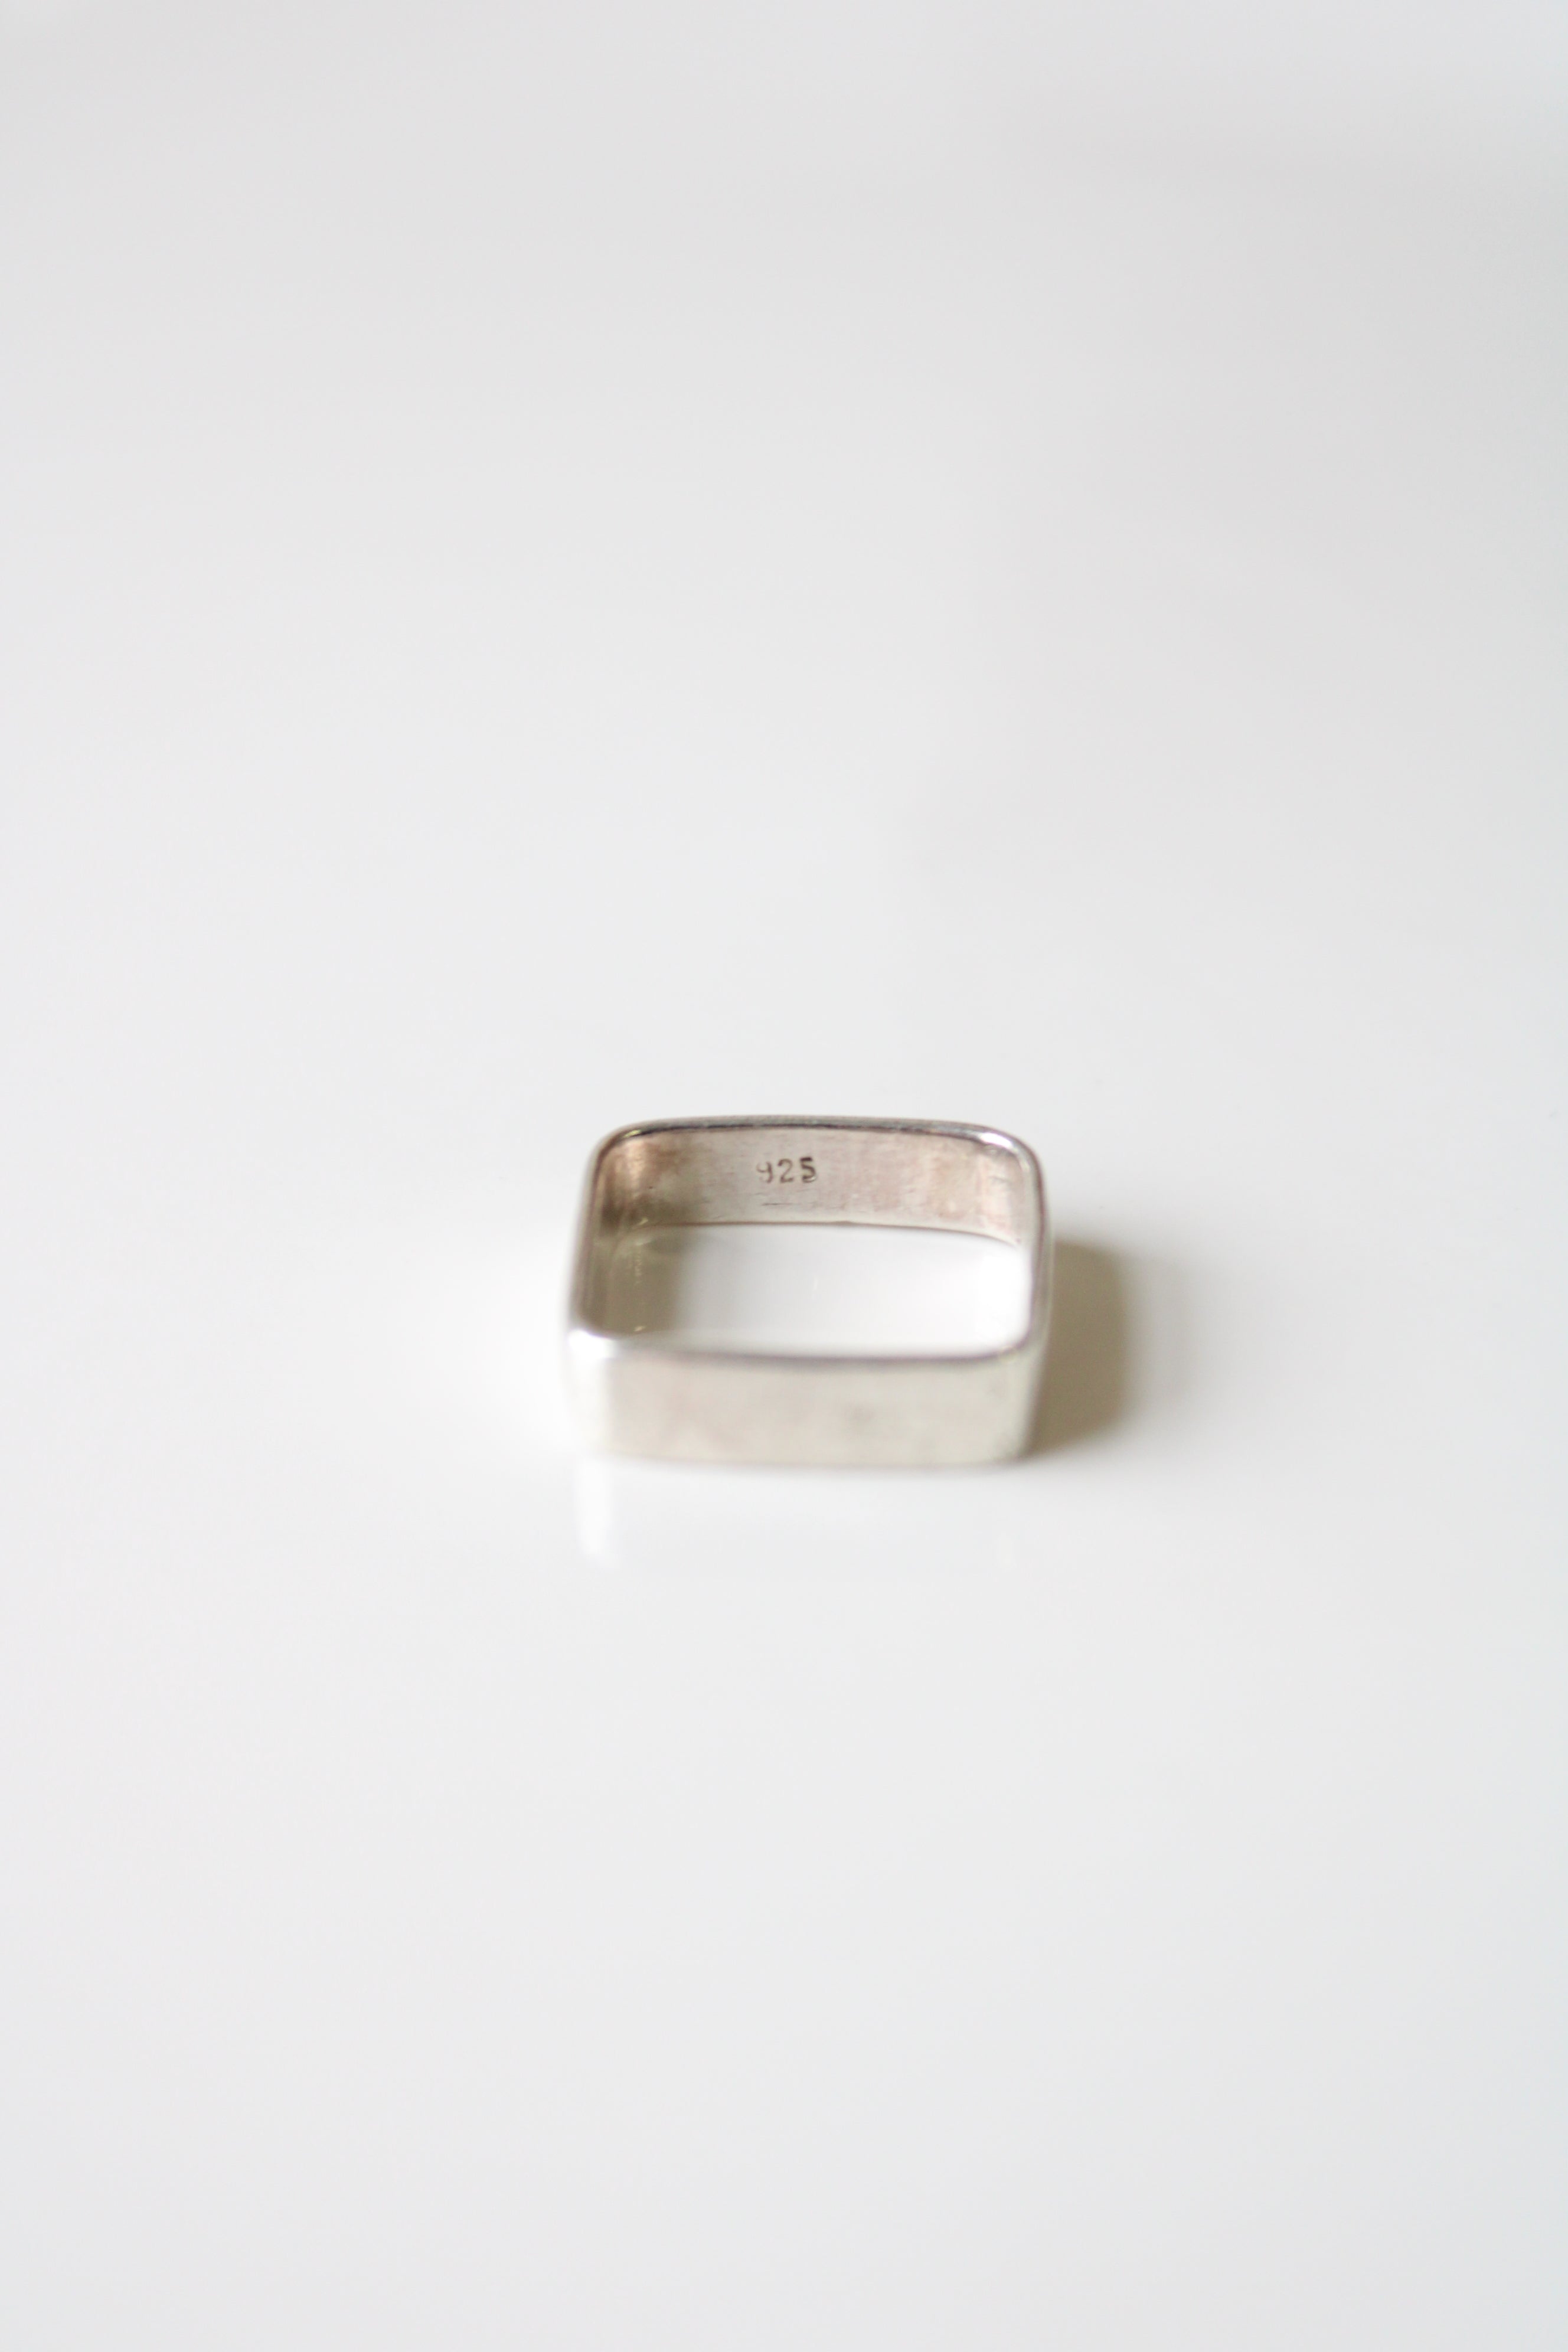 Sterling Silver Square Ring | Size 7